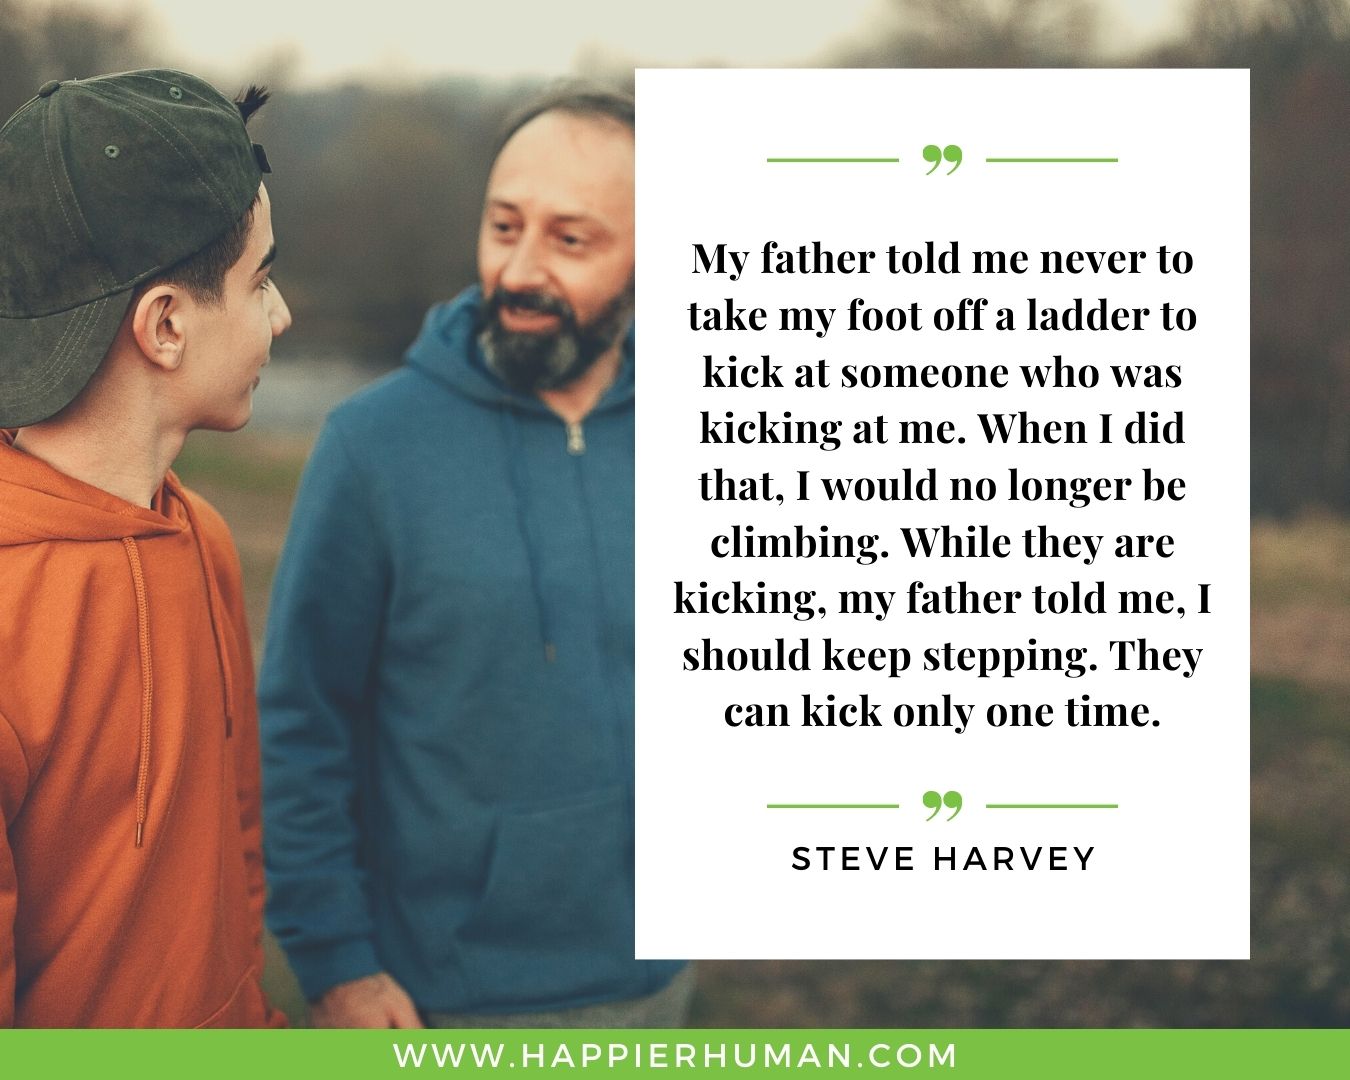 Haters Quotes - “My father told me never to take my foot off a ladder to kick at someone who was kicking at me. When I did that, I would no longer be climbing. While they are kicking, my father told me, I should keep stepping. They can kick only one time.” - Steve Harvey